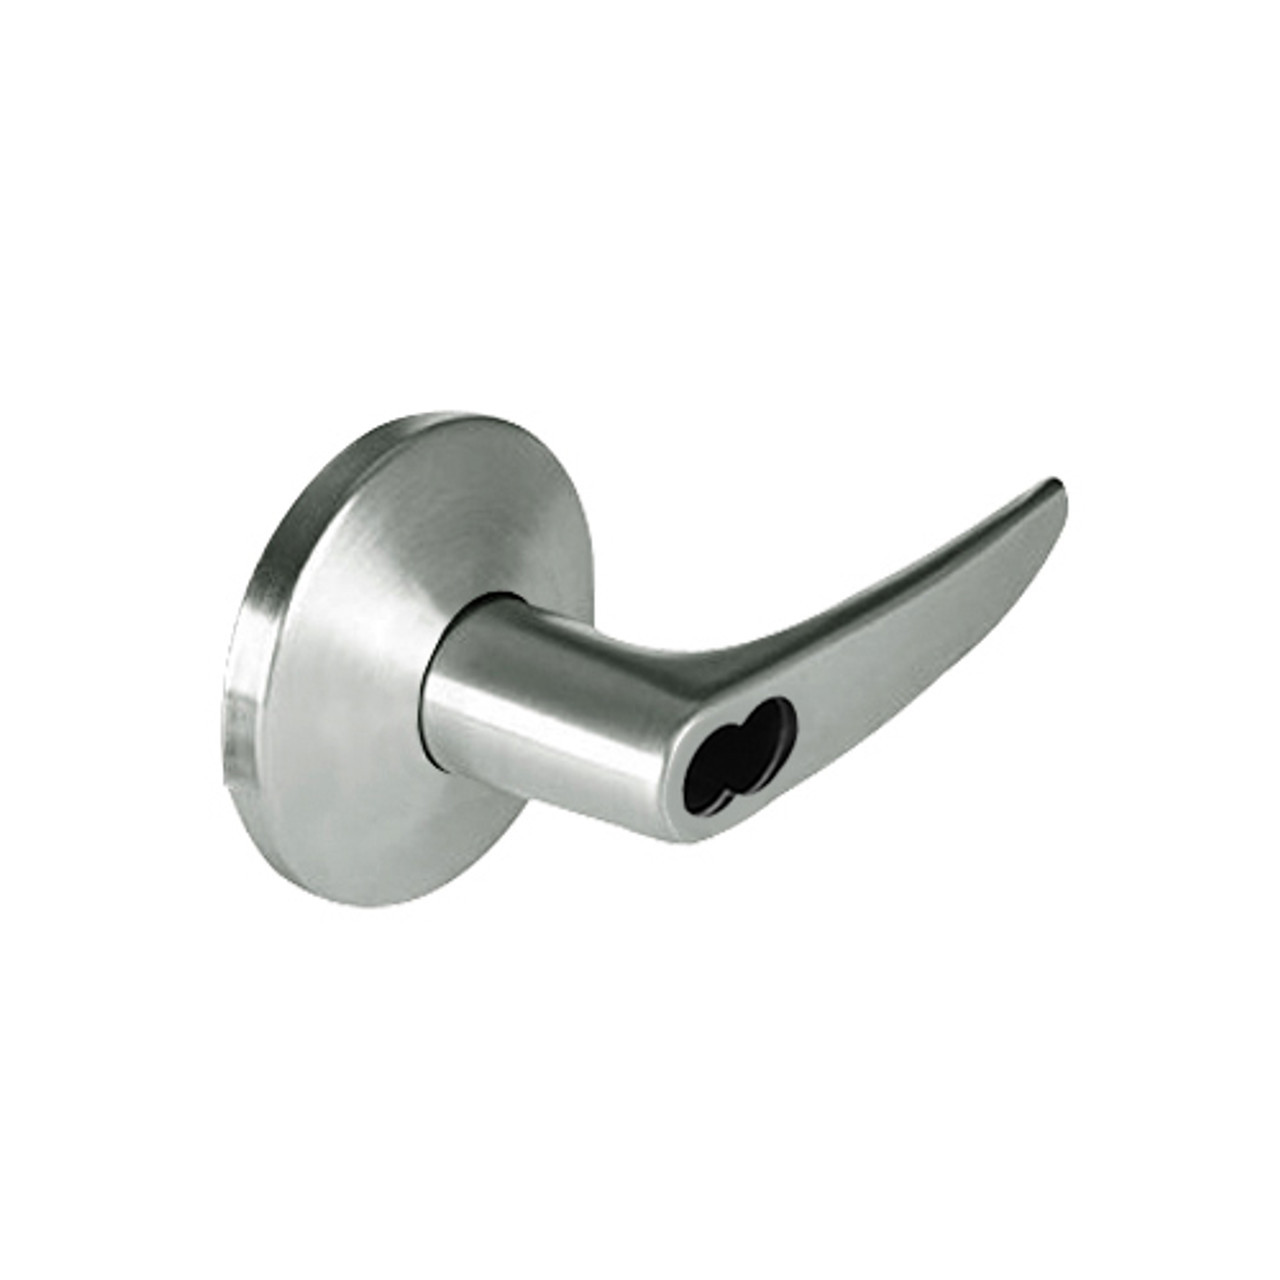 9K37DR16LSTK619LM Best 9K Series Special Function Cylindrical Lever Locks with Curved without Return Lever Design Accept 7 Pin Best Core in Satin Nickel